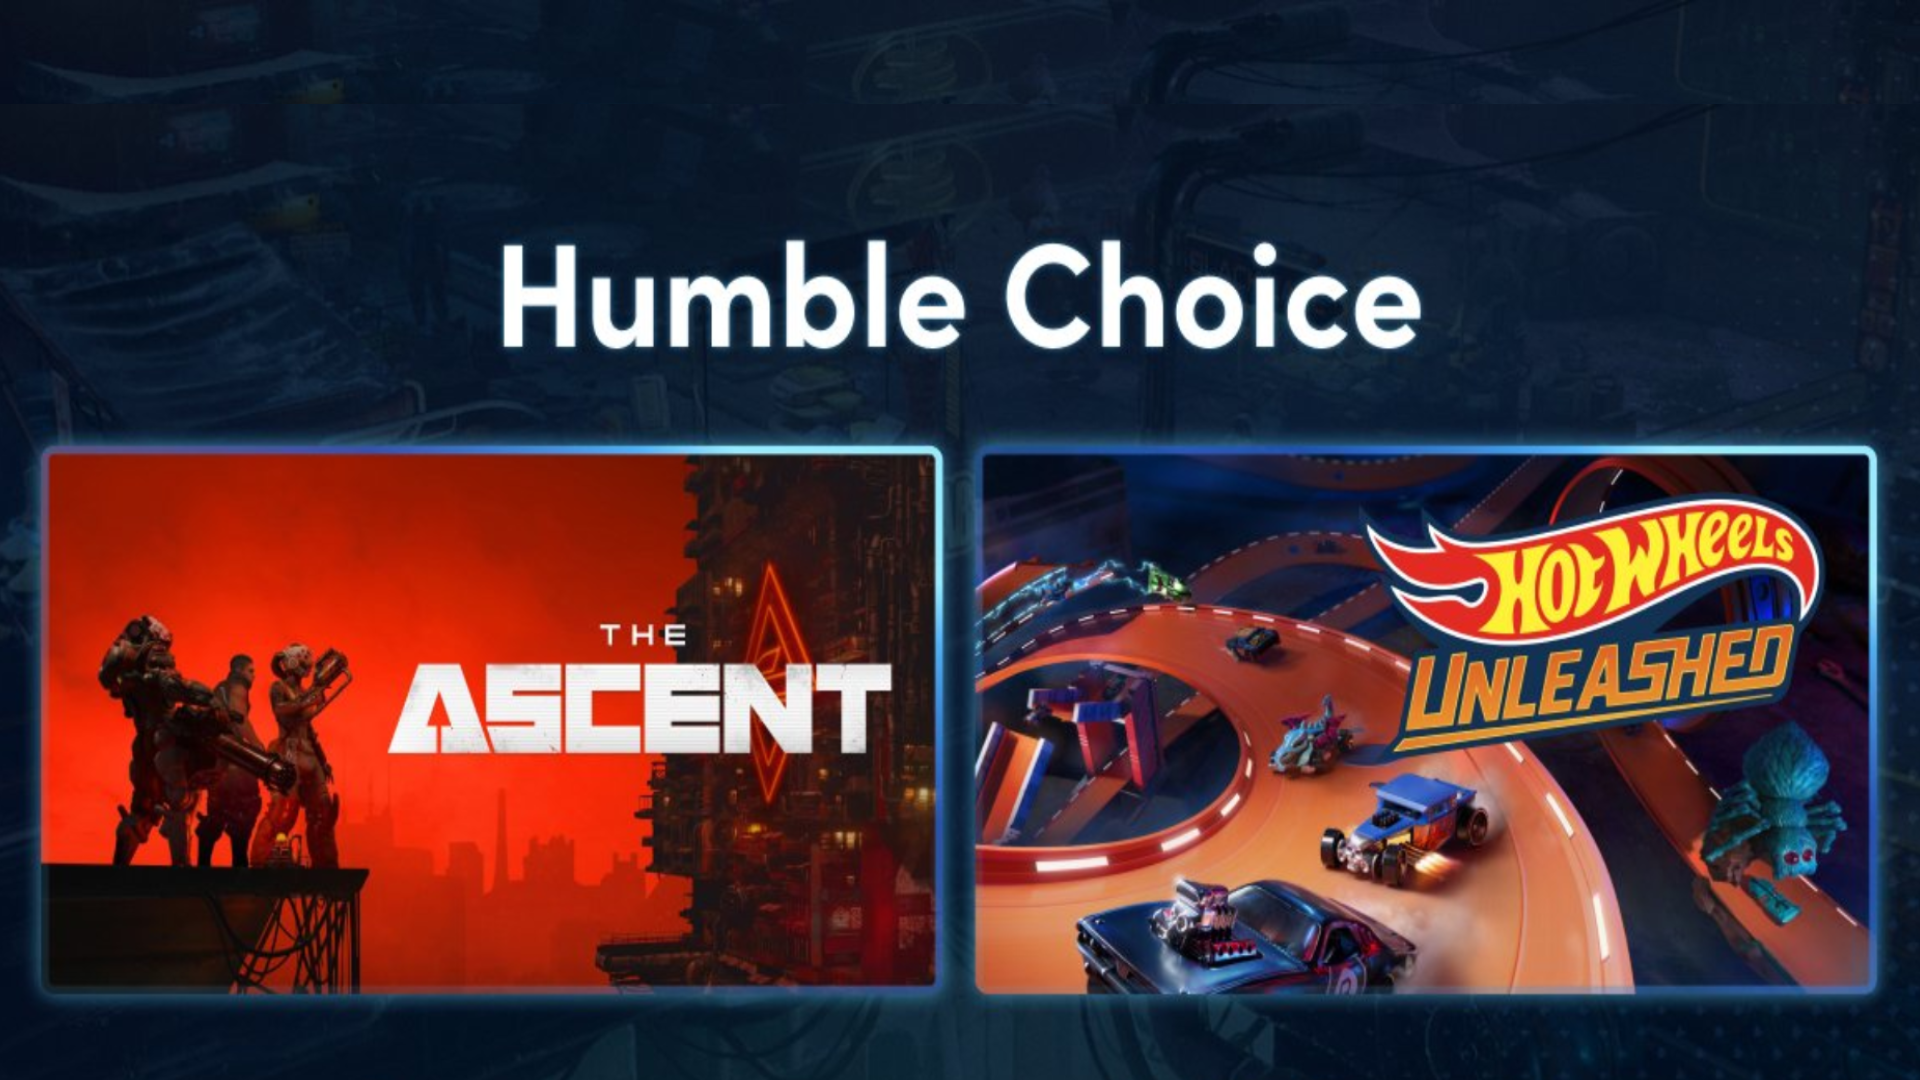 Image for Get The Ascent and A Plague Tale: Innocence in the August Humble Choice bundle